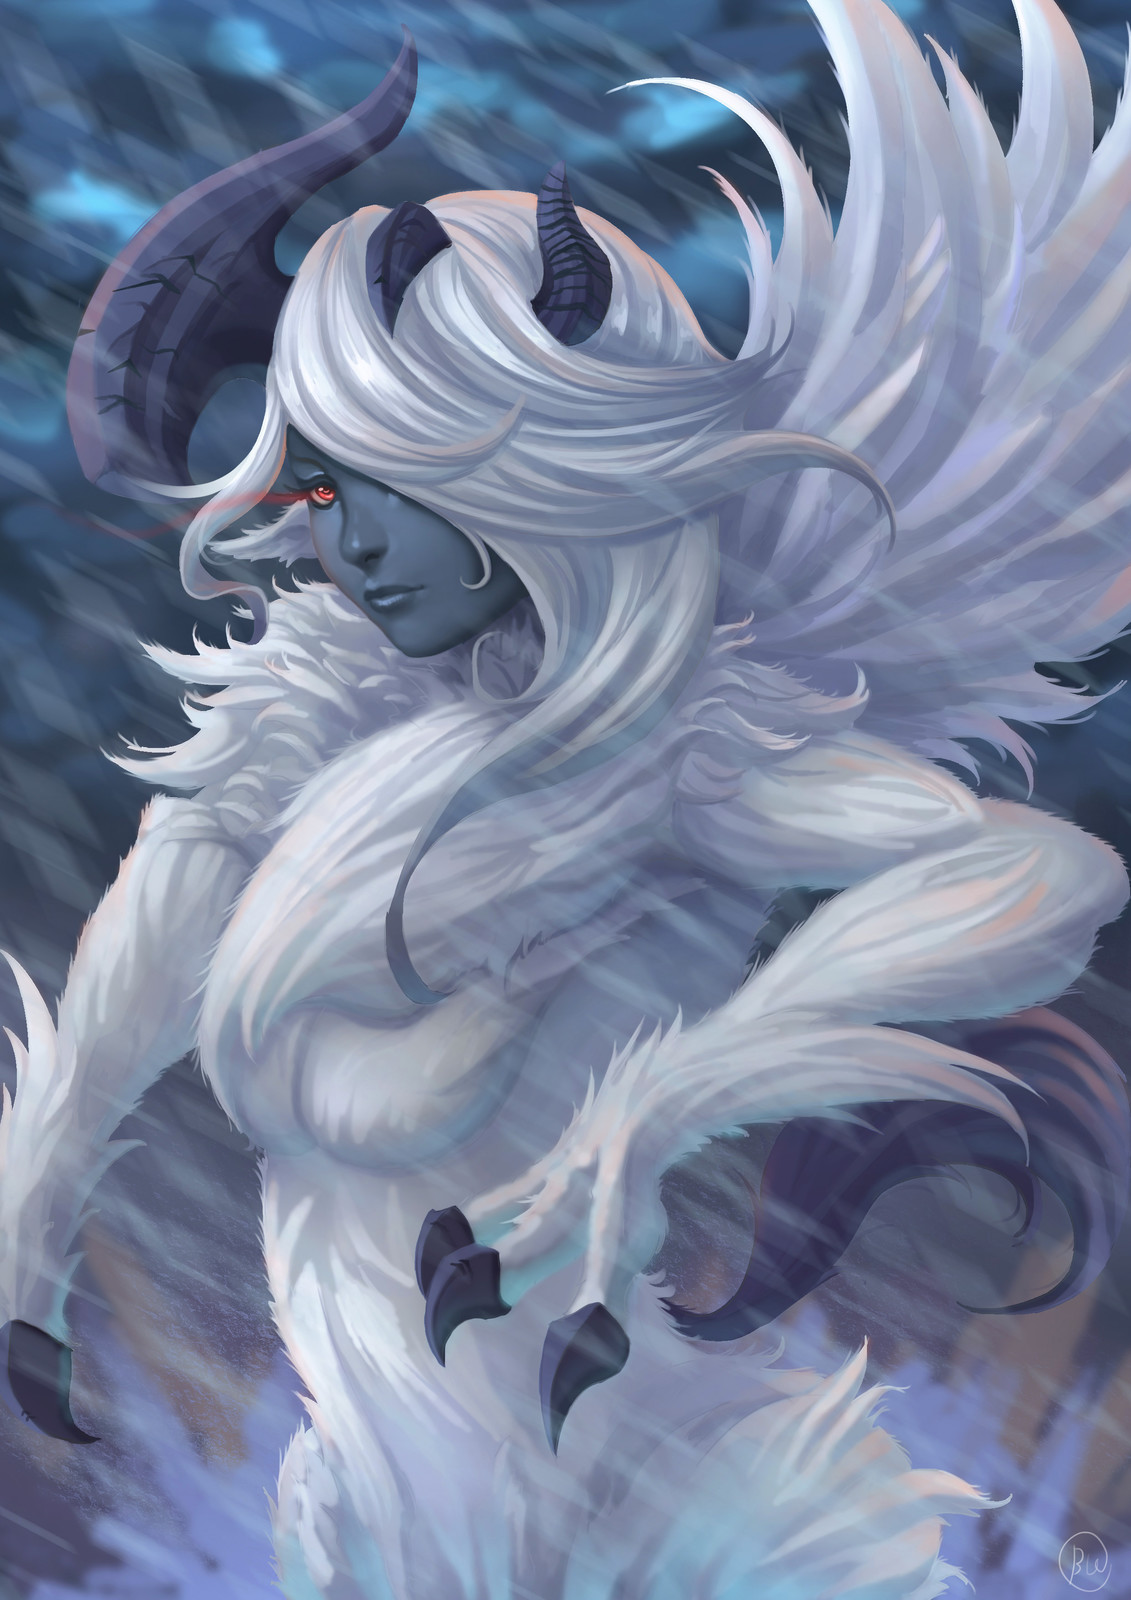 A fanart gijinka / creature bend of mega absol from the pokemon series done...